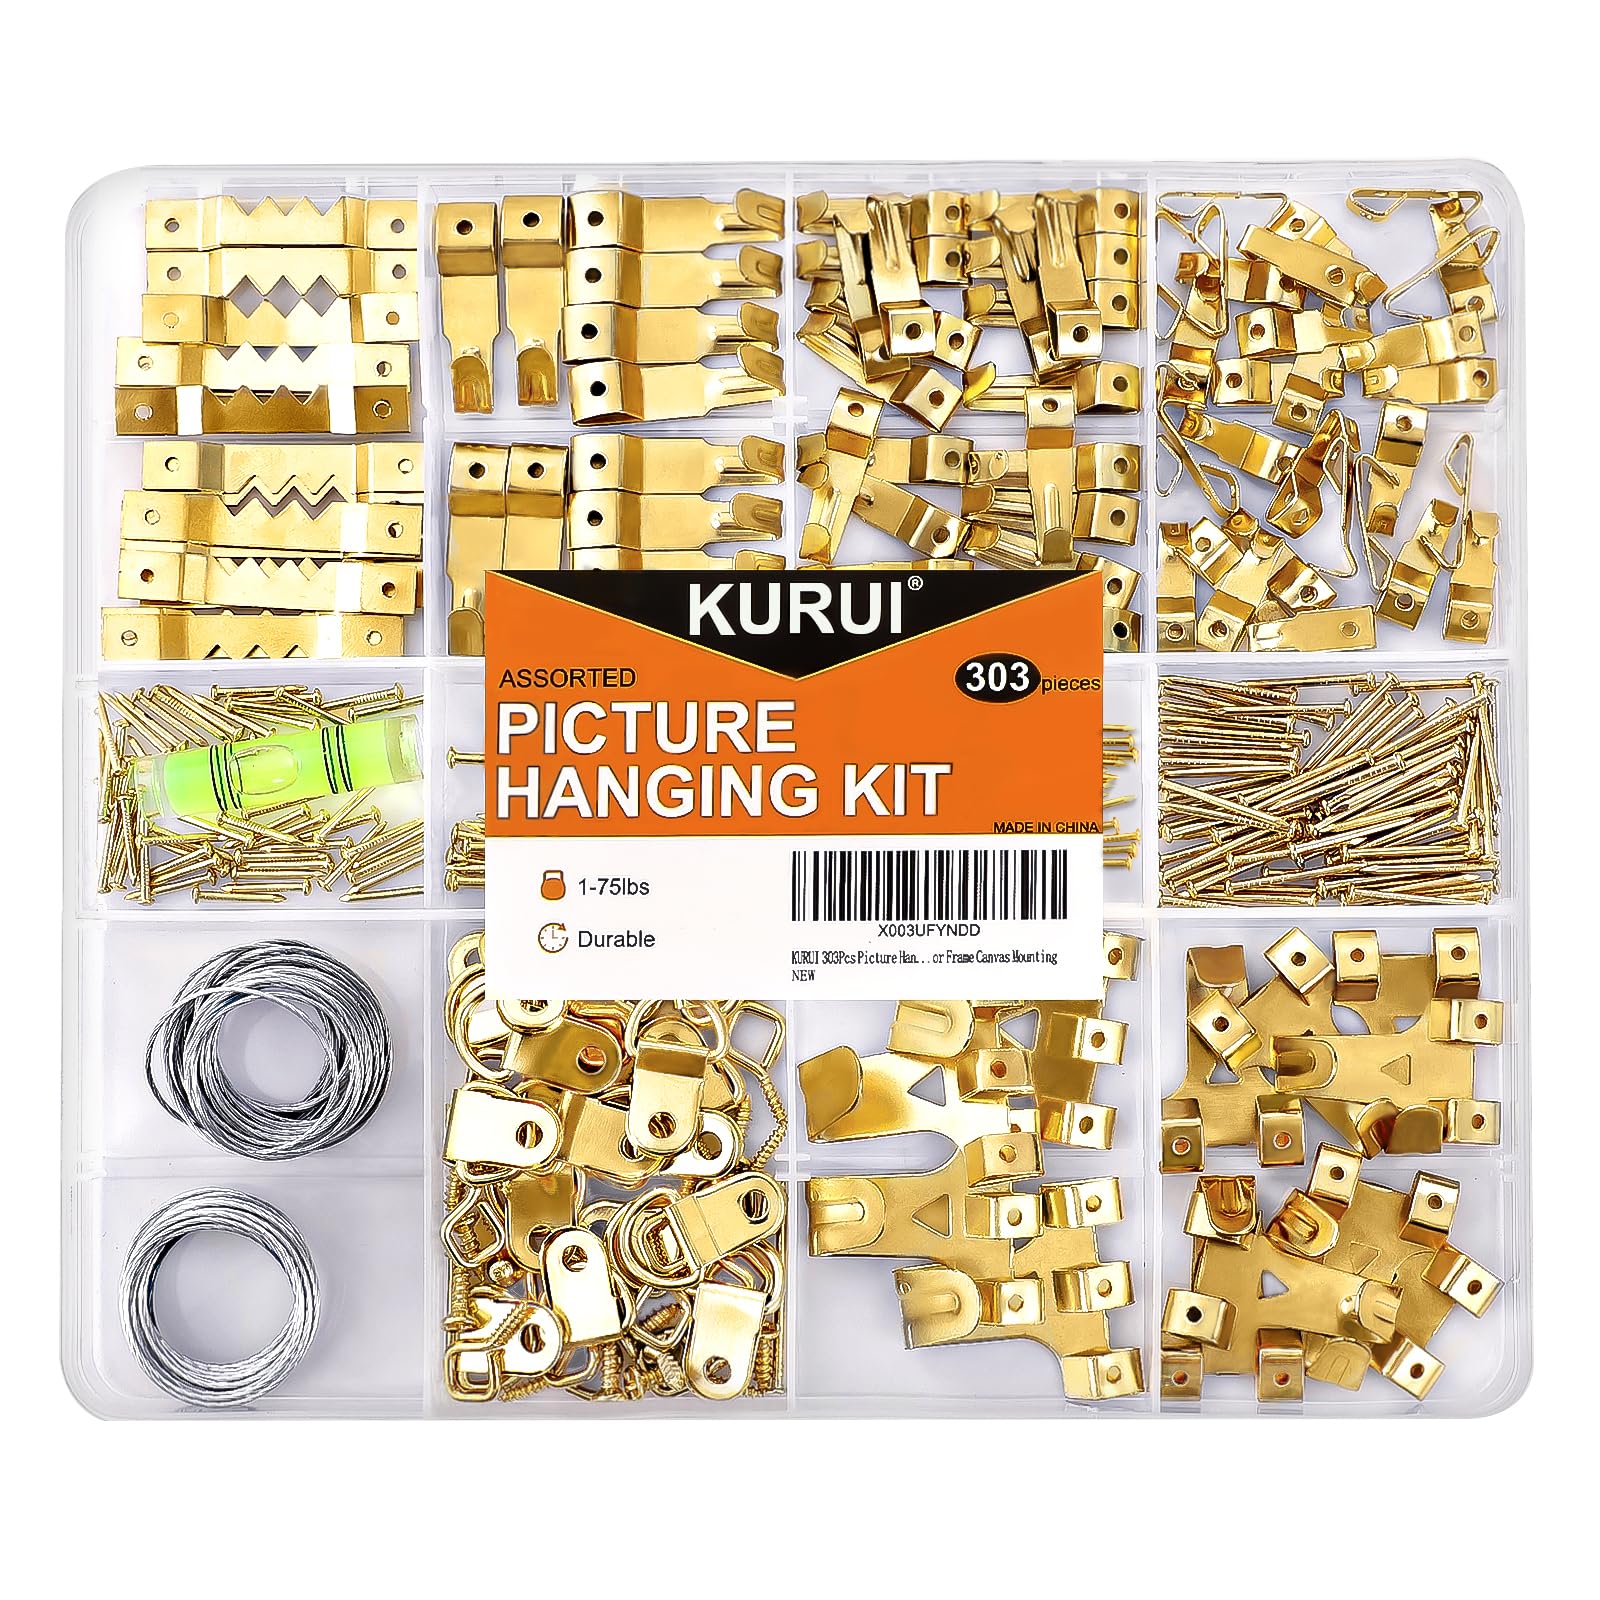 KURUI 303pcs Picture Hanging Kit, Picture Hangers Assorted Kit with Heavy Duty Wall Hooks, Sawtooth, Picture Wire, D Rings, Hardware Nails, Eye